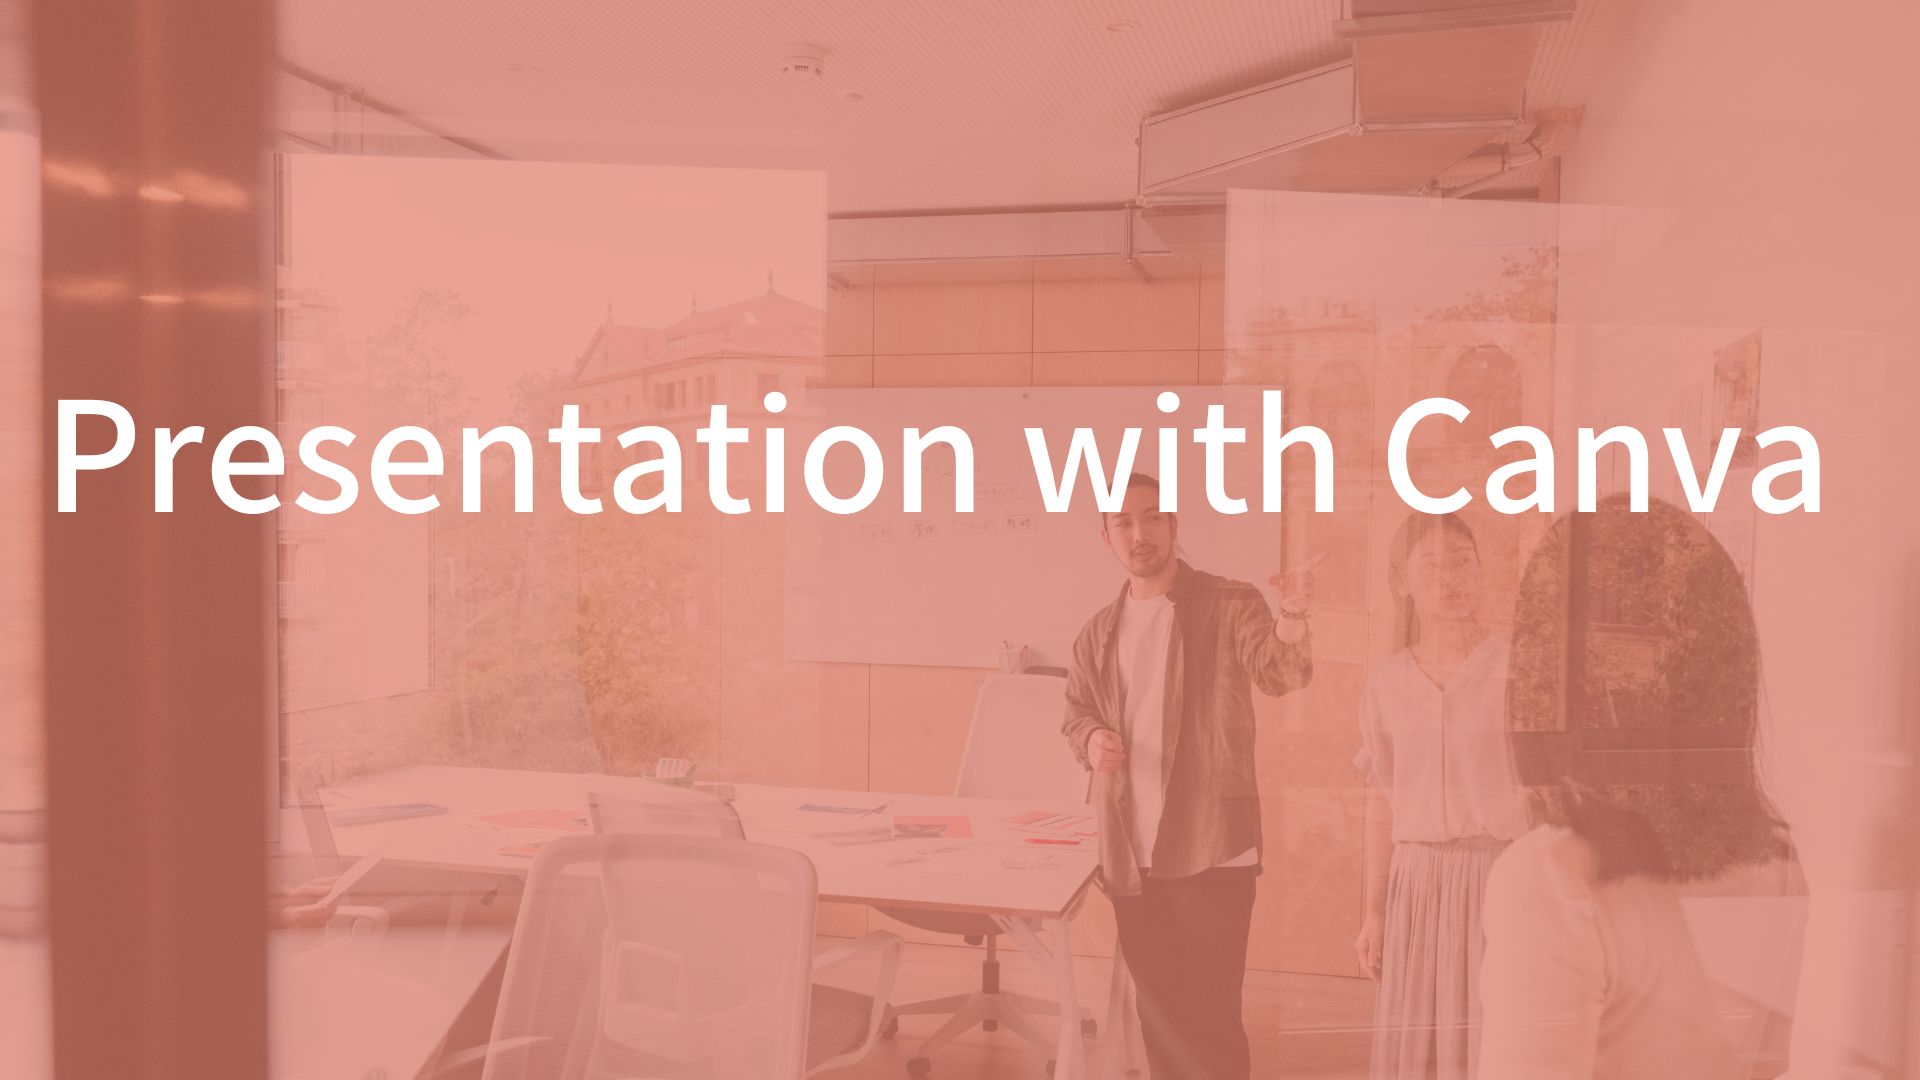 Creating Presentations with Canva